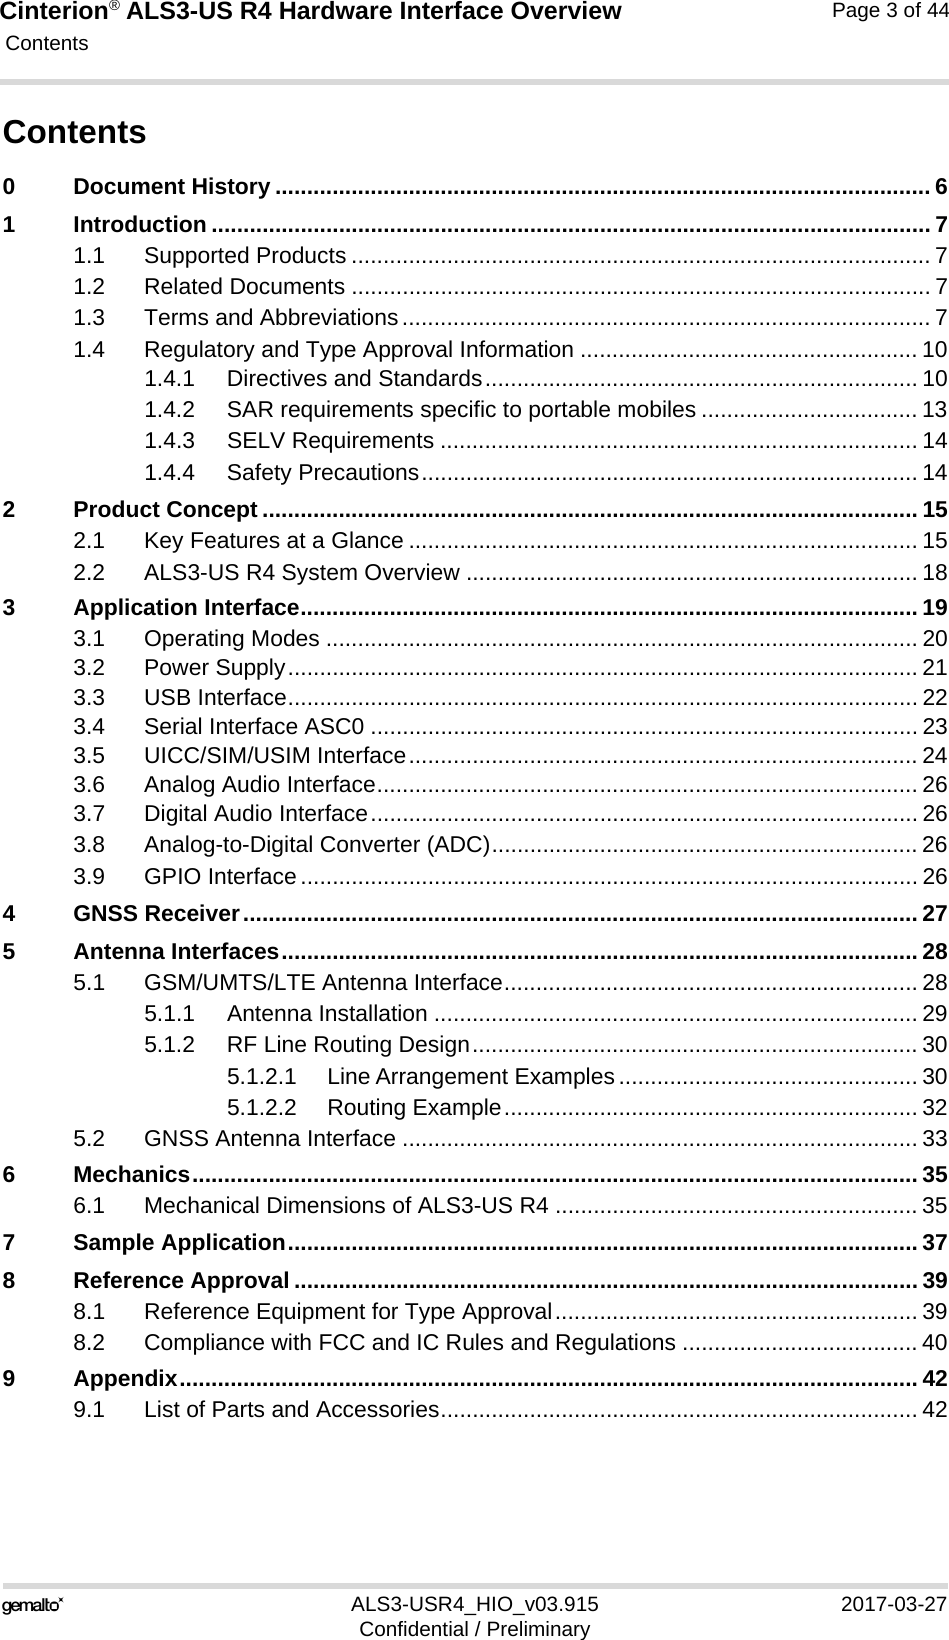 Cinterion® ALS3-US R4 Hardware Interface Overview Contents44ALS3-USR4_HIO_v03.915 2017-03-27Confidential / PreliminaryPage 3 of 44Contents0 Document History ....................................................................................................... 61 Introduction ................................................................................................................. 71.1 Supported Products ........................................................................................... 71.2 Related Documents ........................................................................................... 71.3 Terms and Abbreviations................................................................................... 71.4 Regulatory and Type Approval Information ..................................................... 101.4.1 Directives and Standards.................................................................... 101.4.2 SAR requirements specific to portable mobiles .................................. 131.4.3 SELV Requirements ........................................................................... 141.4.4 Safety Precautions.............................................................................. 142 Product Concept ....................................................................................................... 152.1 Key Features at a Glance ................................................................................ 152.2 ALS3-US R4 System Overview ....................................................................... 183 Application Interface................................................................................................. 193.1 Operating Modes ............................................................................................. 203.2 Power Supply................................................................................................... 213.3 USB Interface................................................................................................... 223.4 Serial Interface ASC0 ...................................................................................... 233.5 UICC/SIM/USIM Interface................................................................................ 243.6 Analog Audio Interface..................................................................................... 263.7 Digital Audio Interface...................................................................................... 263.8 Analog-to-Digital Converter (ADC)................................................................... 263.9 GPIO Interface................................................................................................. 264 GNSS Receiver.......................................................................................................... 275 Antenna Interfaces.................................................................................................... 285.1 GSM/UMTS/LTE Antenna Interface................................................................. 285.1.1 Antenna Installation ............................................................................ 295.1.2 RF Line Routing Design...................................................................... 305.1.2.1 Line Arrangement Examples ............................................... 305.1.2.2 Routing Example................................................................. 325.2 GNSS Antenna Interface ................................................................................. 336 Mechanics.................................................................................................................. 356.1 Mechanical Dimensions of ALS3-US R4 ......................................................... 357 Sample Application................................................................................................... 378 Reference Approval .................................................................................................. 398.1 Reference Equipment for Type Approval......................................................... 398.2 Compliance with FCC and IC Rules and Regulations ..................................... 409 Appendix.................................................................................................................... 429.1 List of Parts and Accessories........................................................................... 42